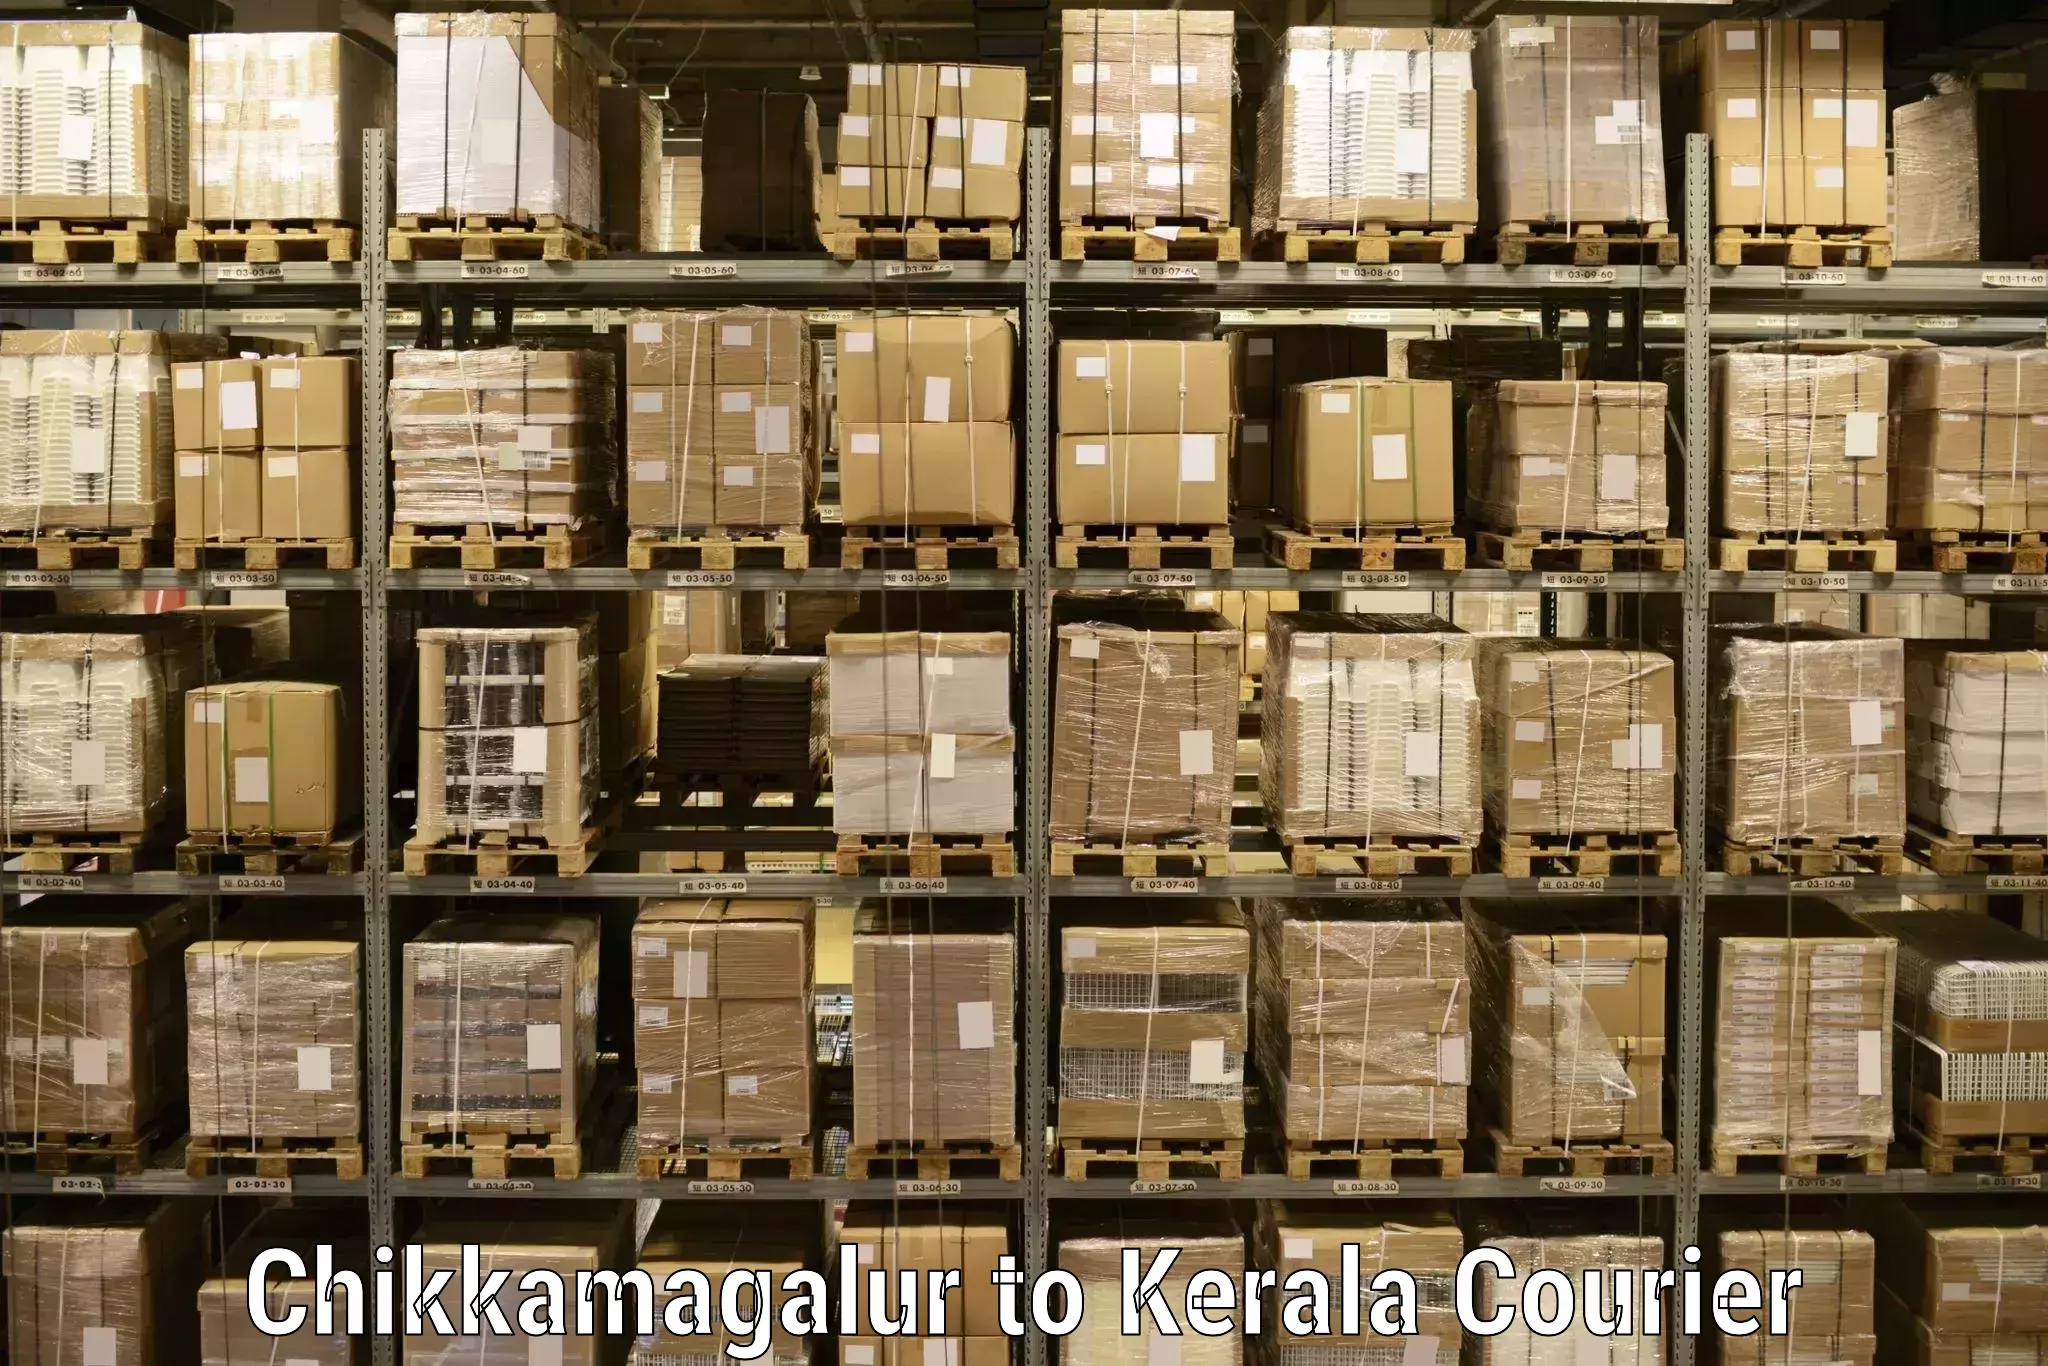 User-friendly courier app Chikkamagalur to Trivandrum